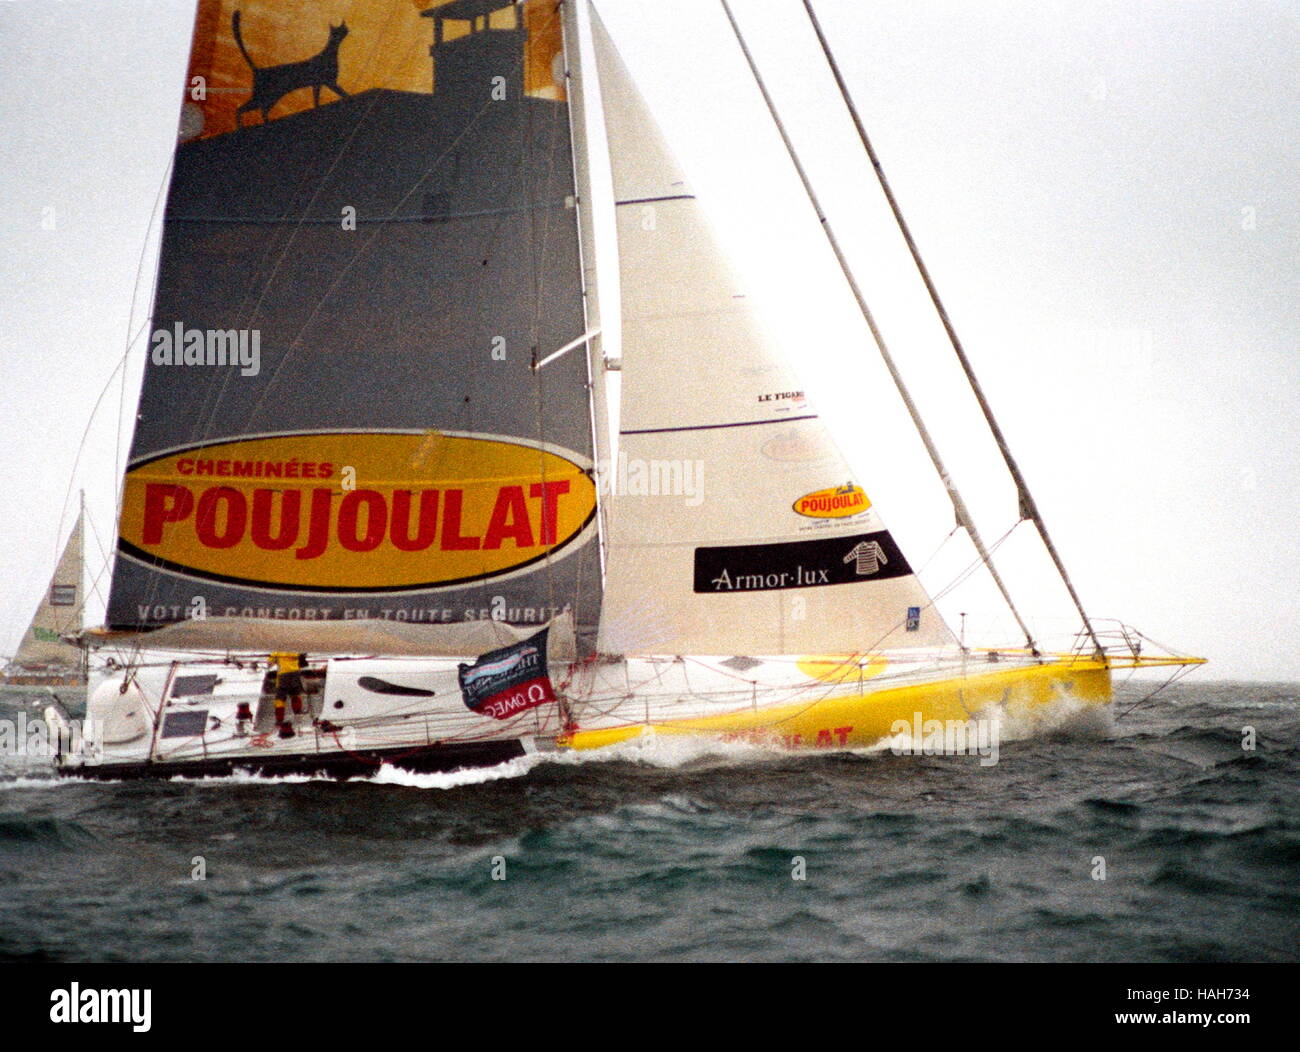 AJAX NEWS PHOTOS. 31ST MAY 2004. PLYMOUTH, ENGLAND. - TRANSAT YACHT RACE - POUJOULAT IN HEAVY WEATHER AT START. PHOTO:JONATHAN EASTLAND/AJAX  REF:43105 D Stock Photo